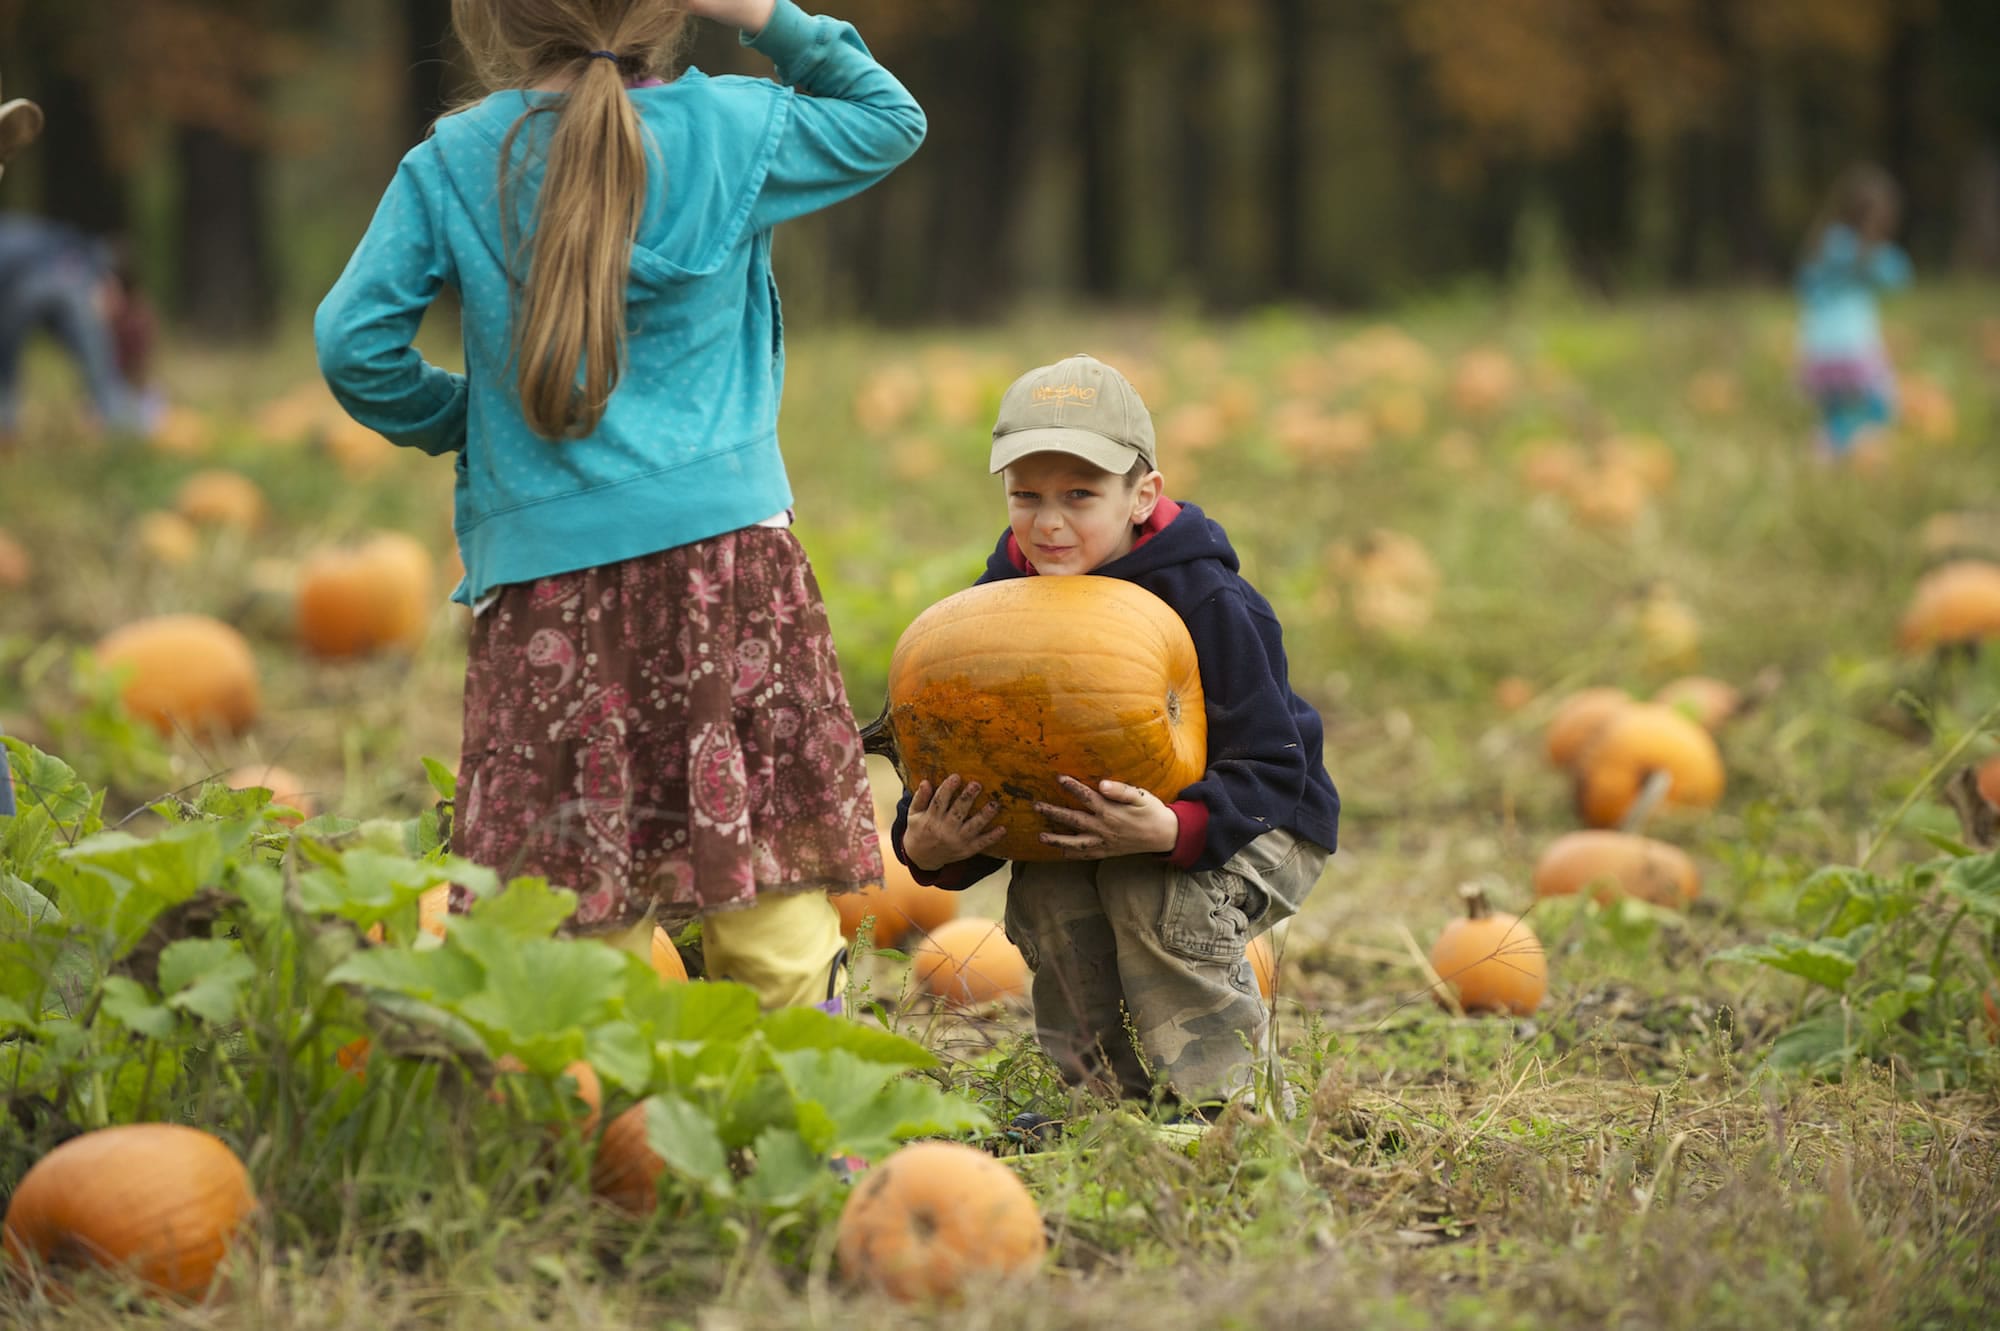 Photos by Steve Lane/The Columbian
Lucas Levanen, 6, tests the &quot;you have to carry your own pumpkin&quot; rule at the 18th annual Pumpkin Festival at Pomeroy Living History Farm.